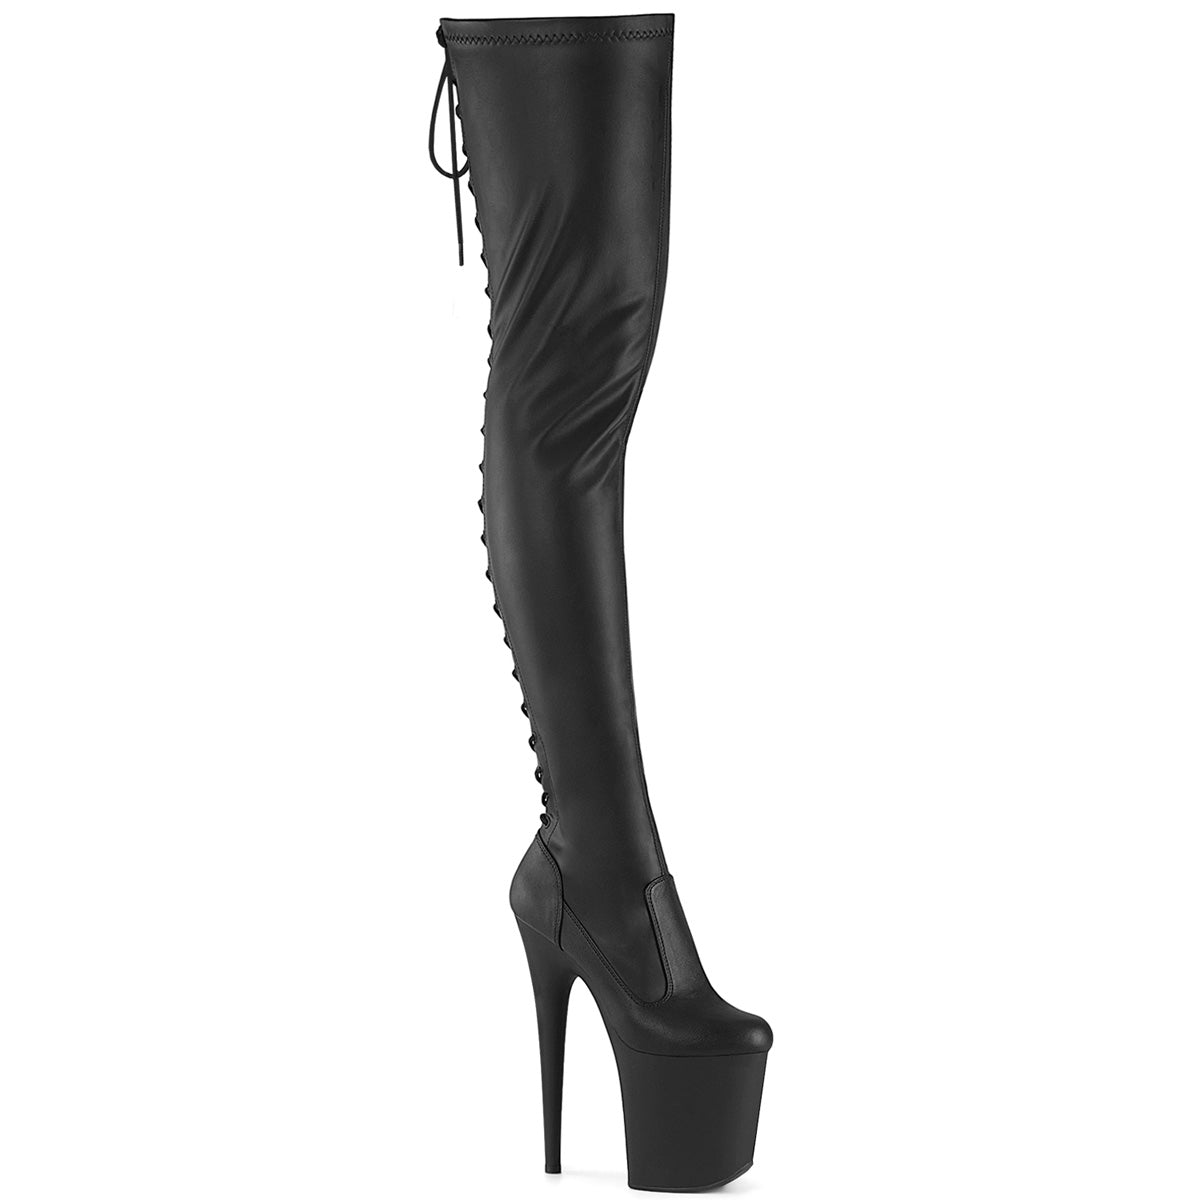 FLAMINGO-3850 Lace-Up Back Stretch Thigh Boot Black Multi view 1